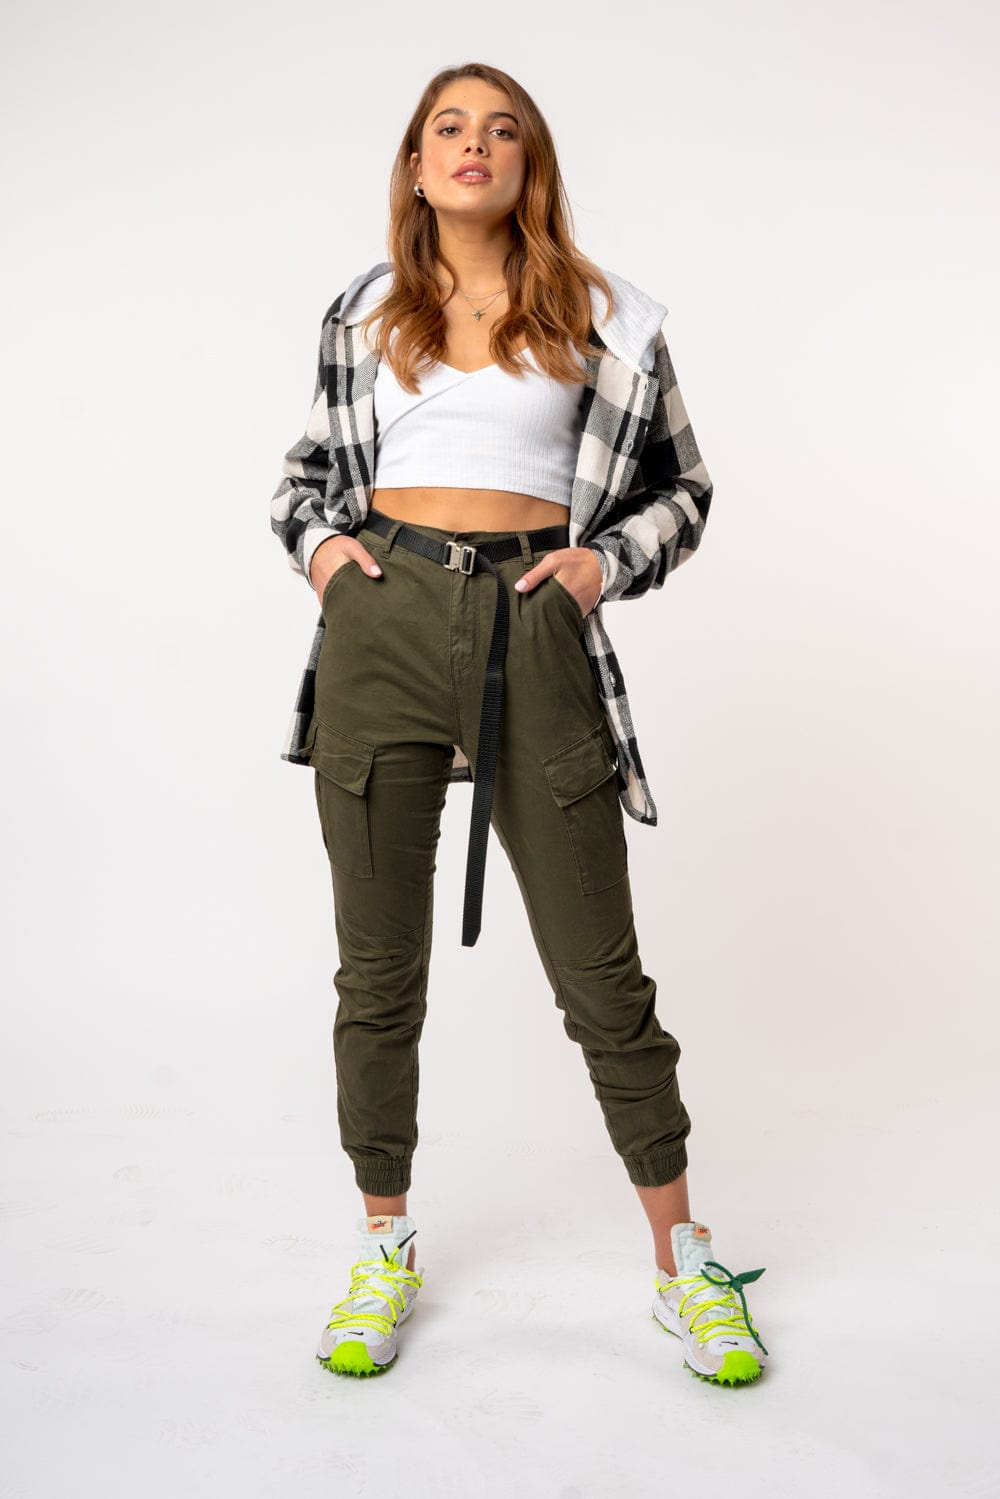 Kameela Cargo Pants - Olive  Plus size baddie outfits, Olive green cargo  pants, Girls fashion clothes